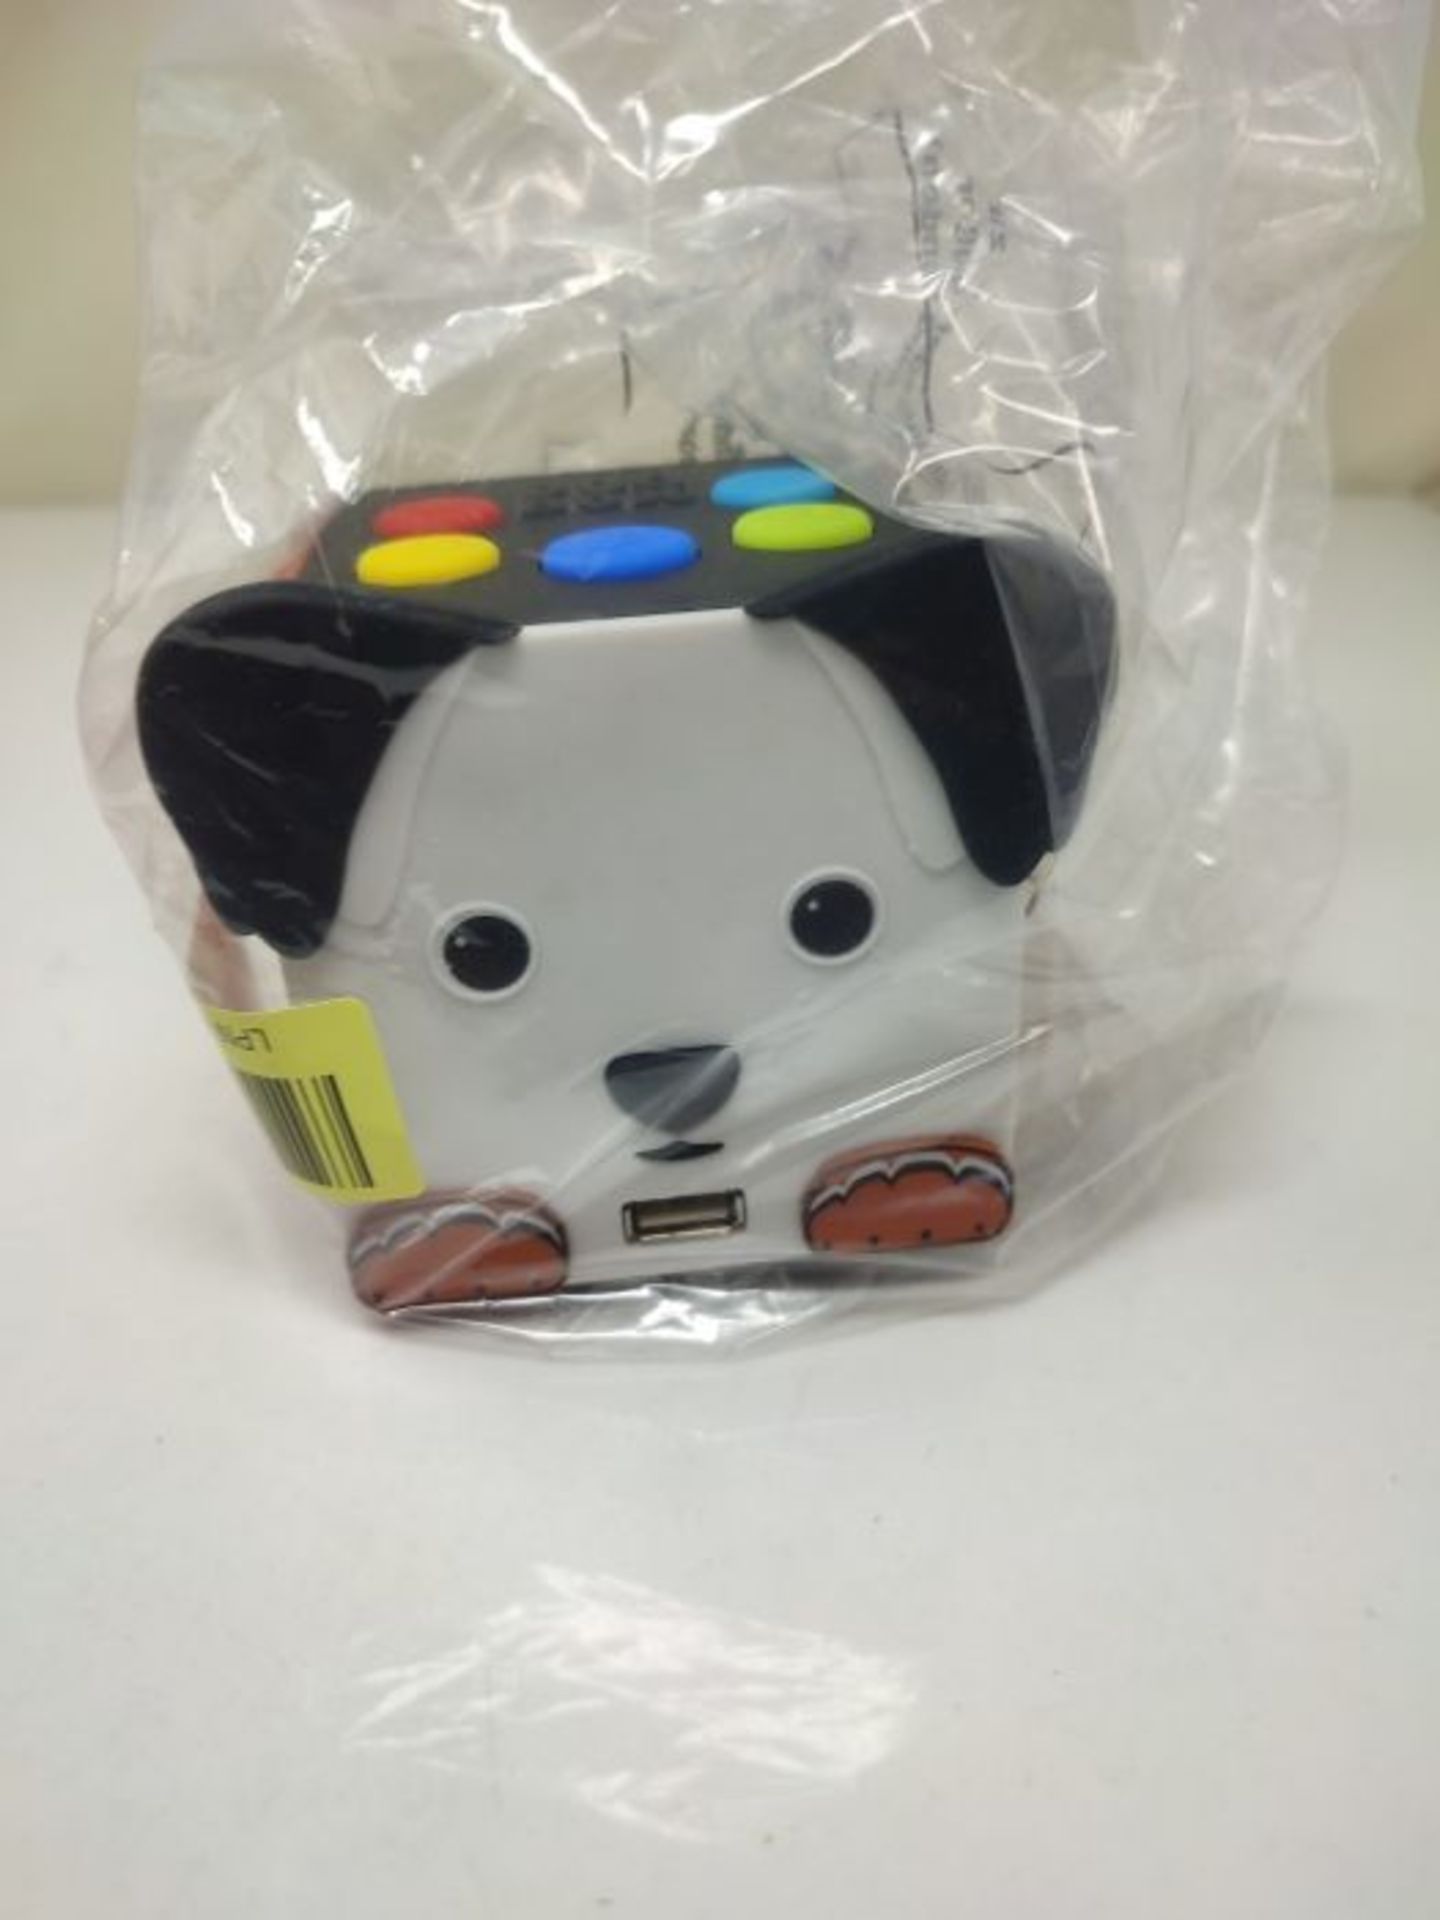 X4-TECH DogBox - Bluetooth Speaker for Children in a Cute Dog Design - USB and SD Card - Image 2 of 2